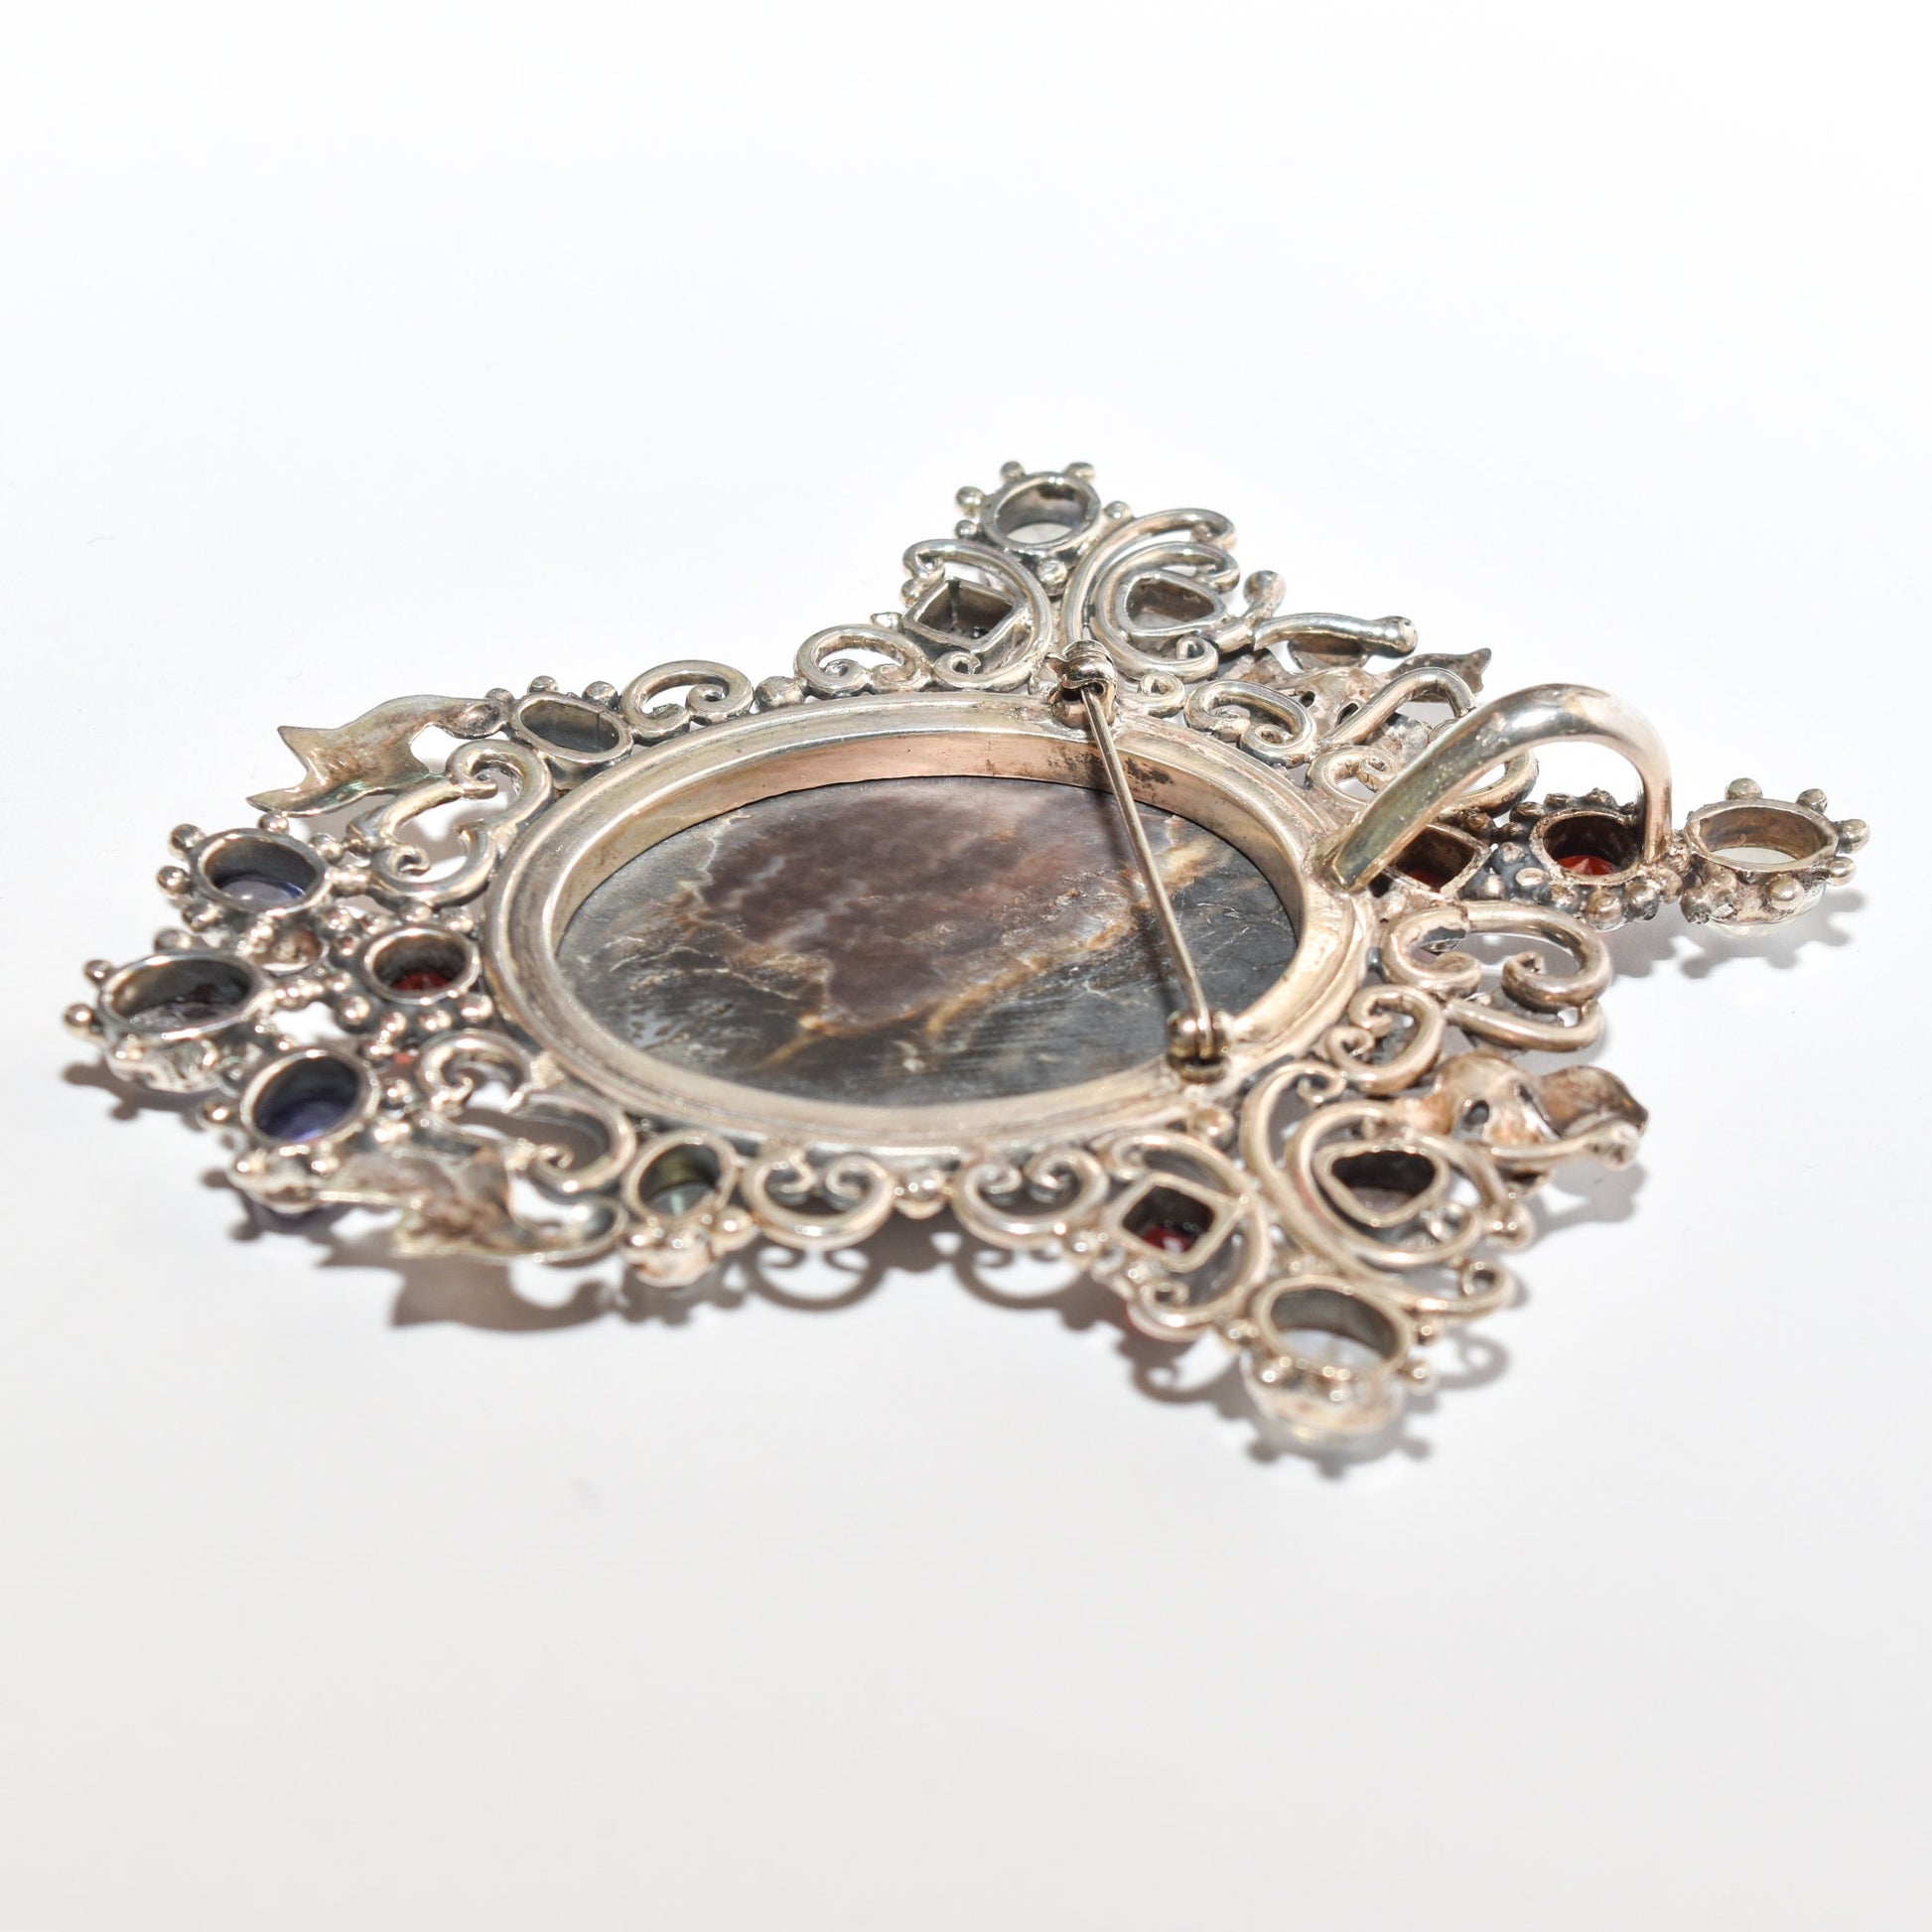 Victorian-style sterling silver cameo pendant brooch with ornate multi-stone design measuring 4 inches long.